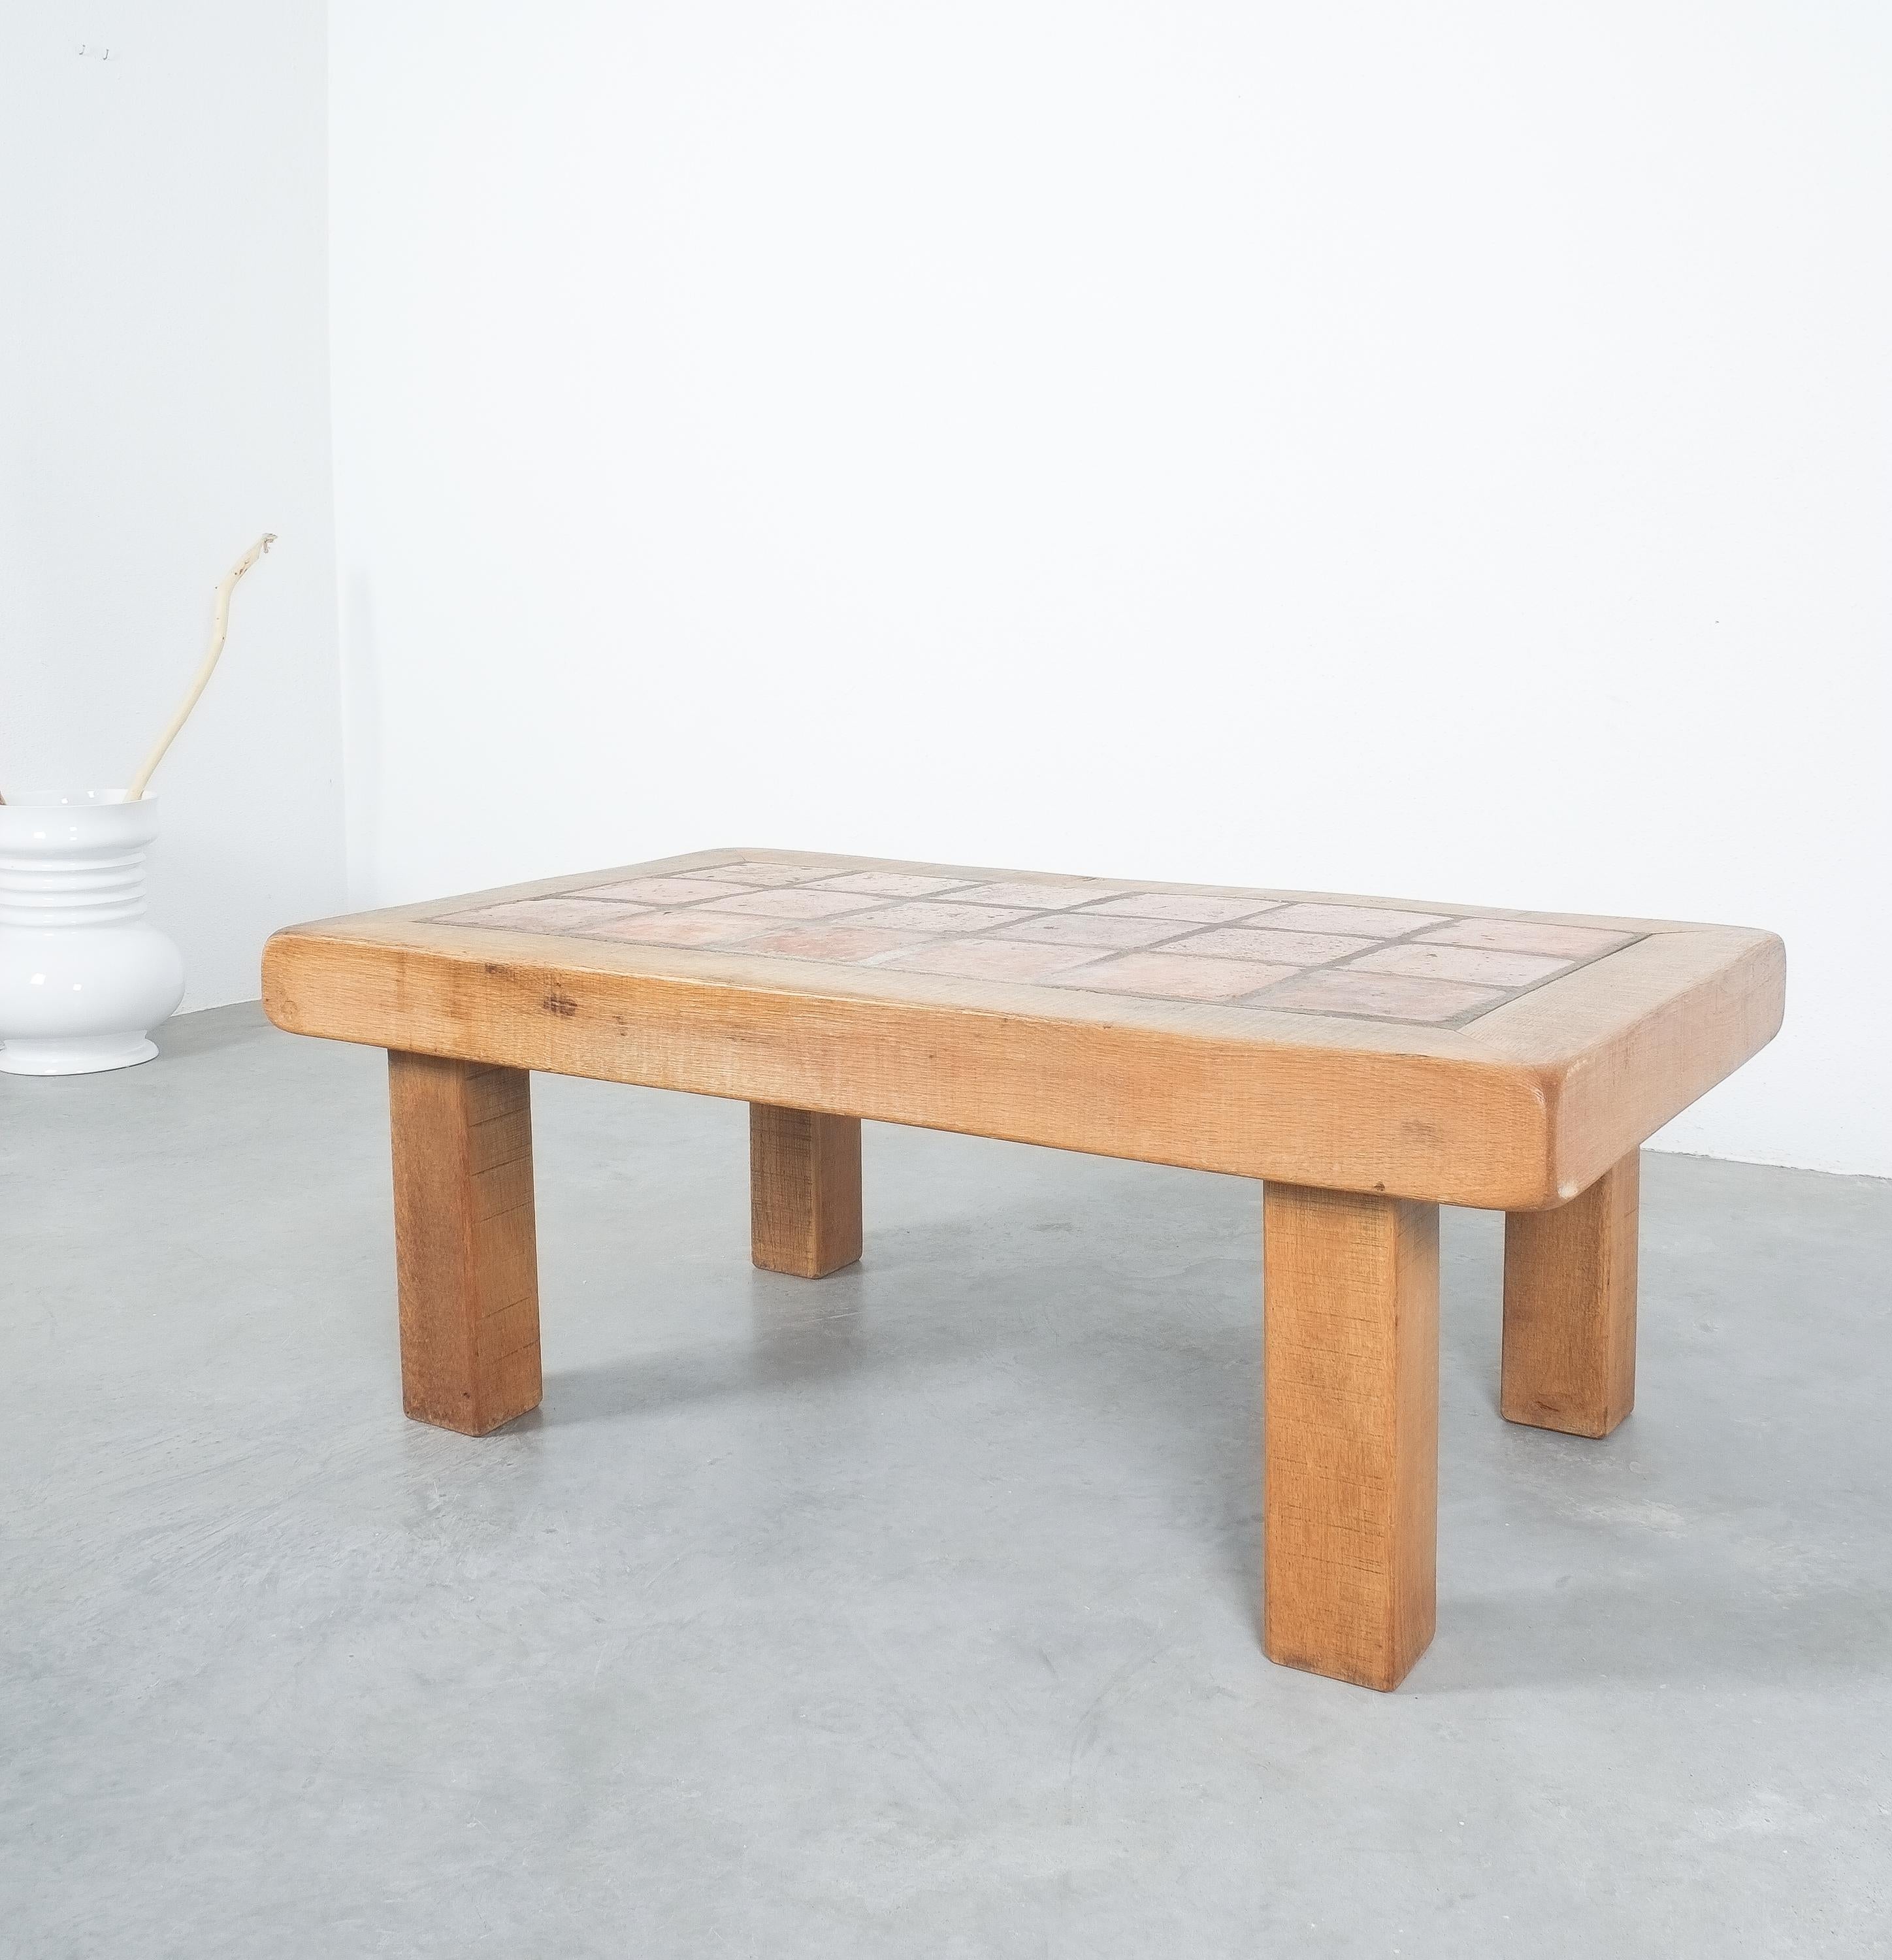 French Large Artisan Oak Terracotta Coffee or Outdoor Table, France, 1950